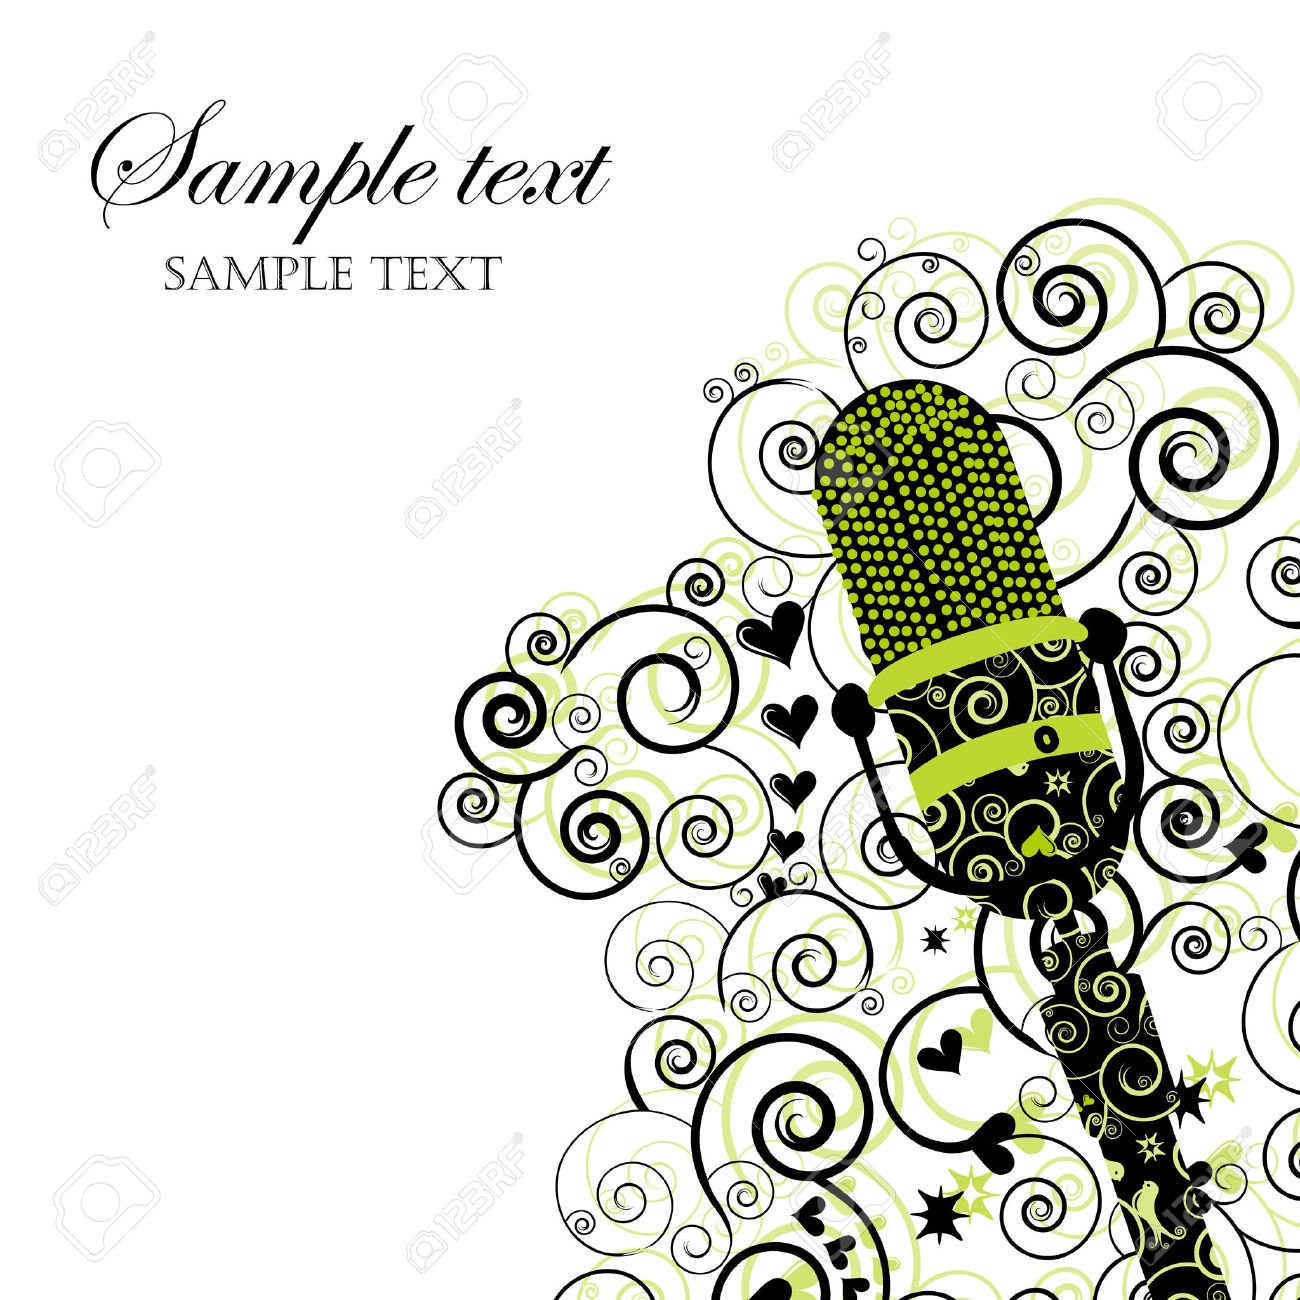 Event Invitation With Microphone Royalty Free Cliparts, Vectors